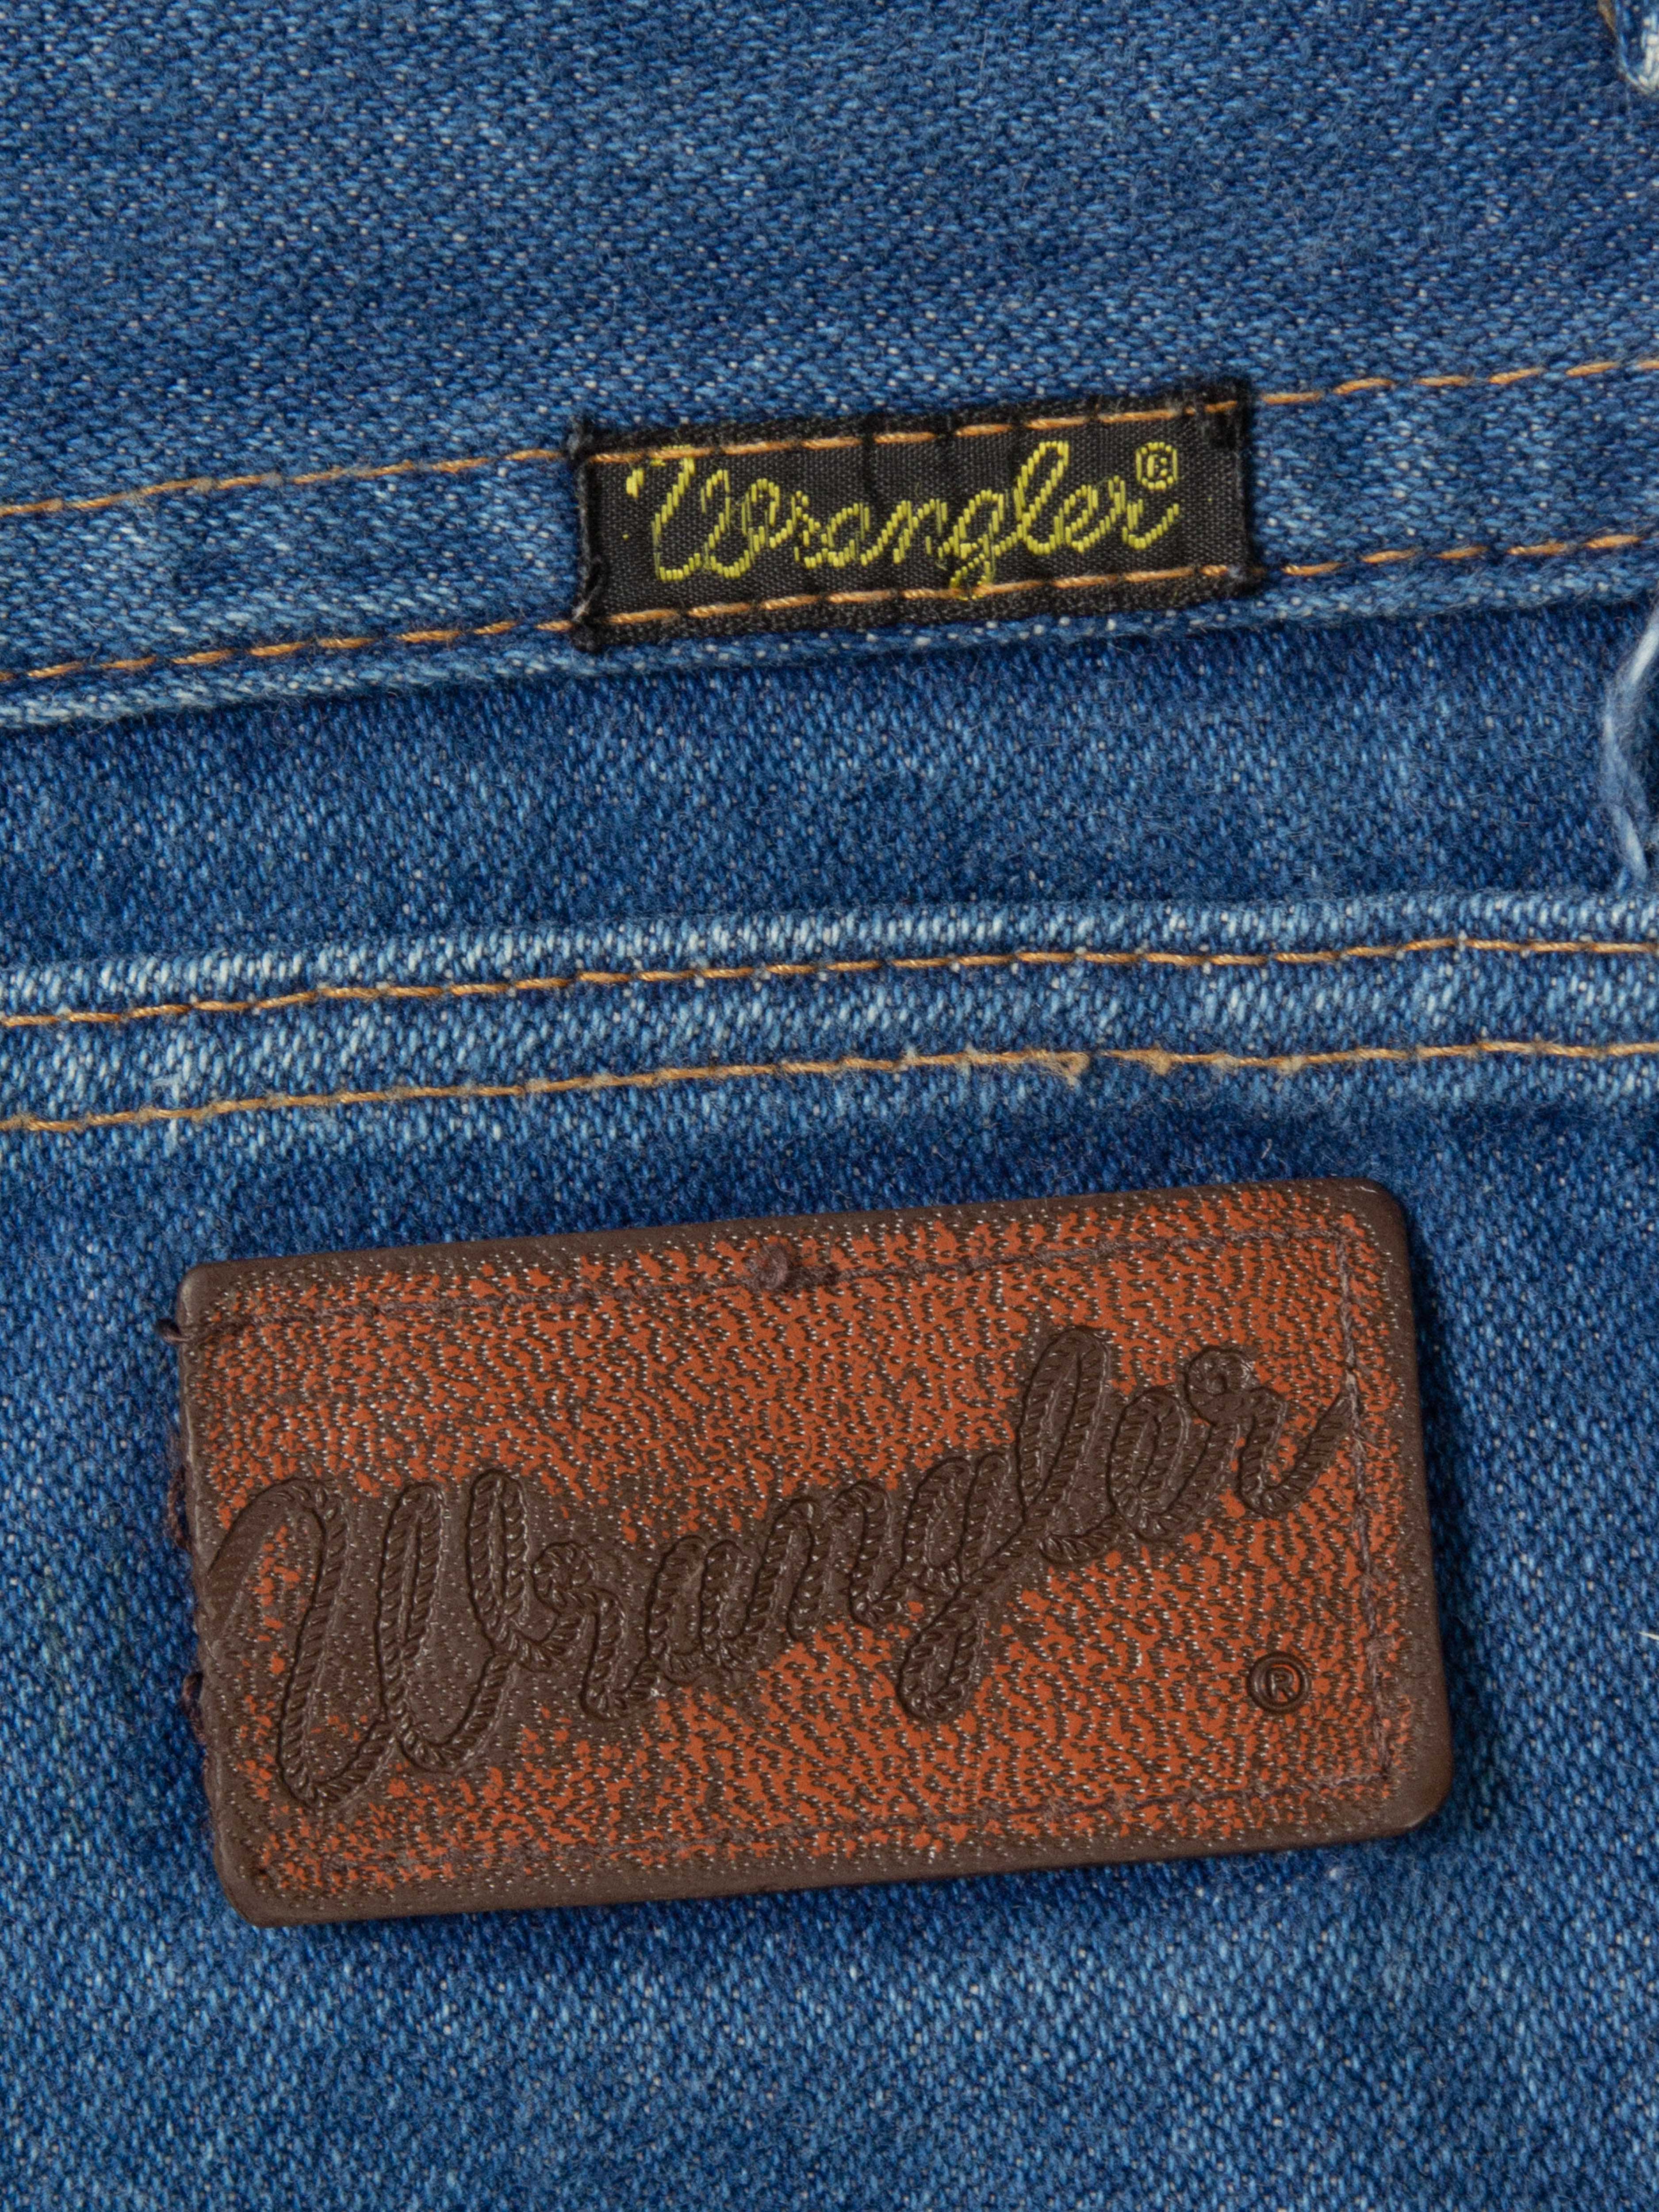 How To Tell If A Pair Of Wrangler Jeans Is Vintage Or Not